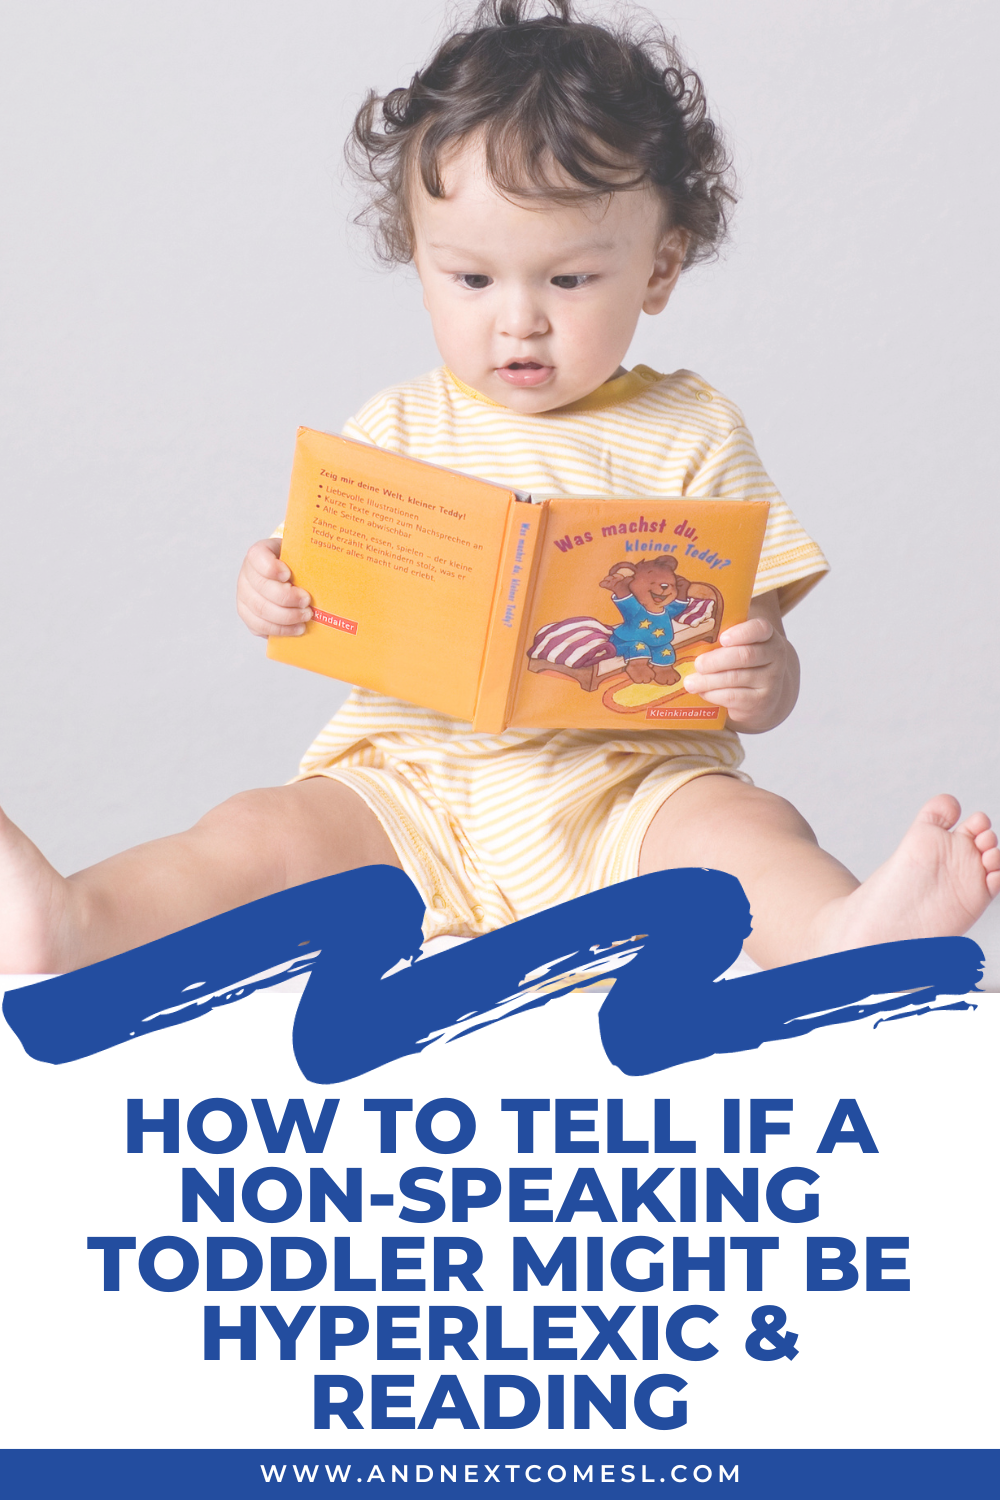 How to tell if a non-speaking toddler might be hyperlexic and reading